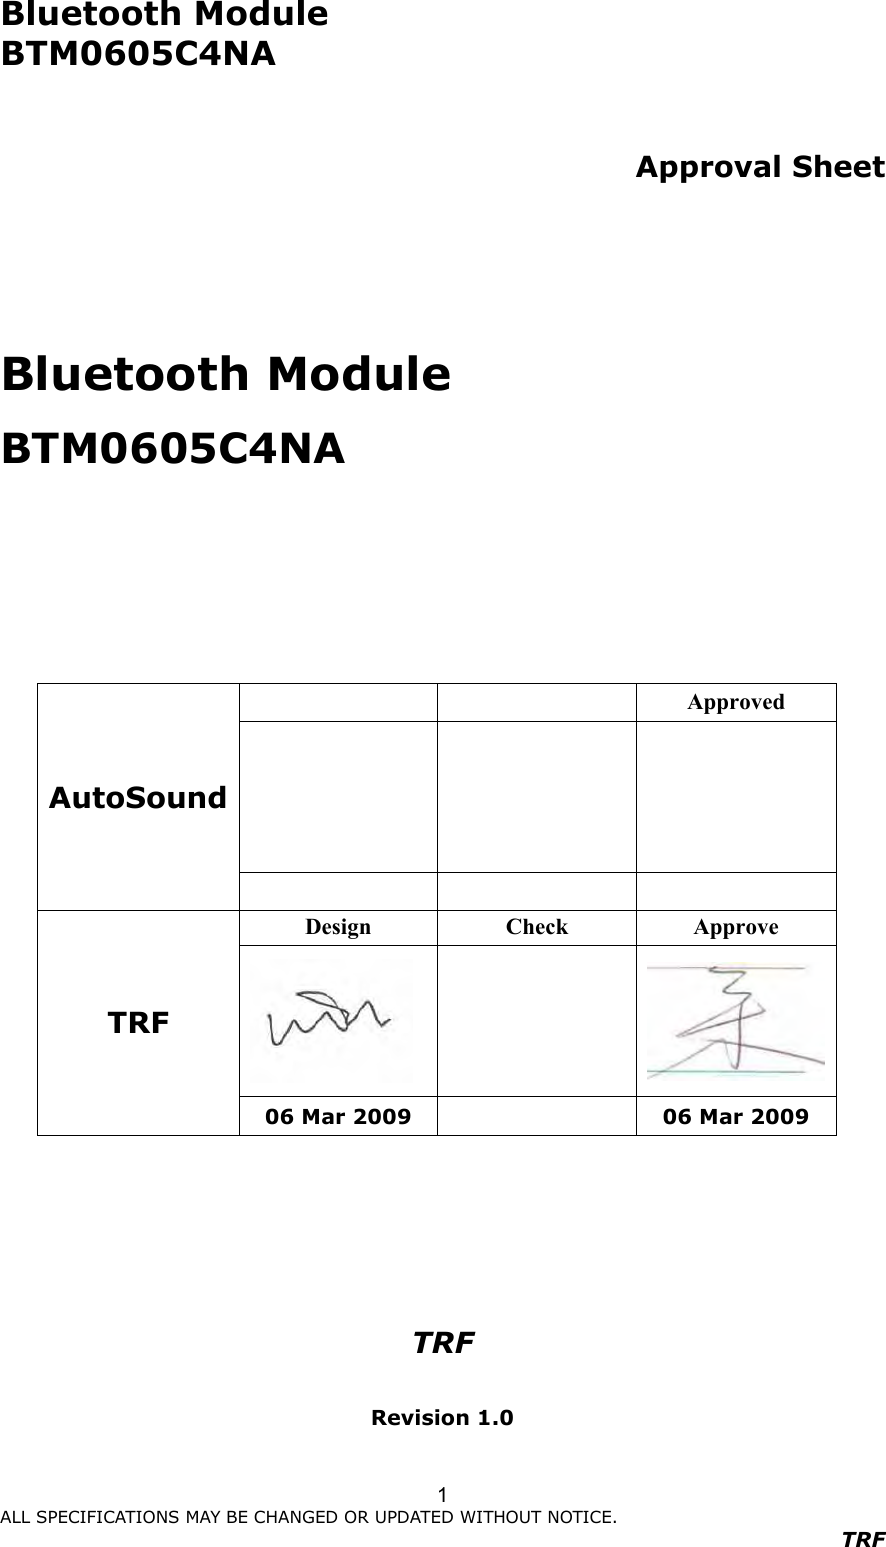 Bluetooth Module     BTM0605C4NA                      ALL SPECIFICATIONS MAY BE CHANGED OR UPDATED WITHOUT NOTICE.   TRF 1  Approval Sheet     Bluetooth Module BTM0605C4NA           TRF  Revision 1.0        Approved        AutoSound    Design  Check  Approve    TRF 06 Mar 2009    06 Mar 2009 